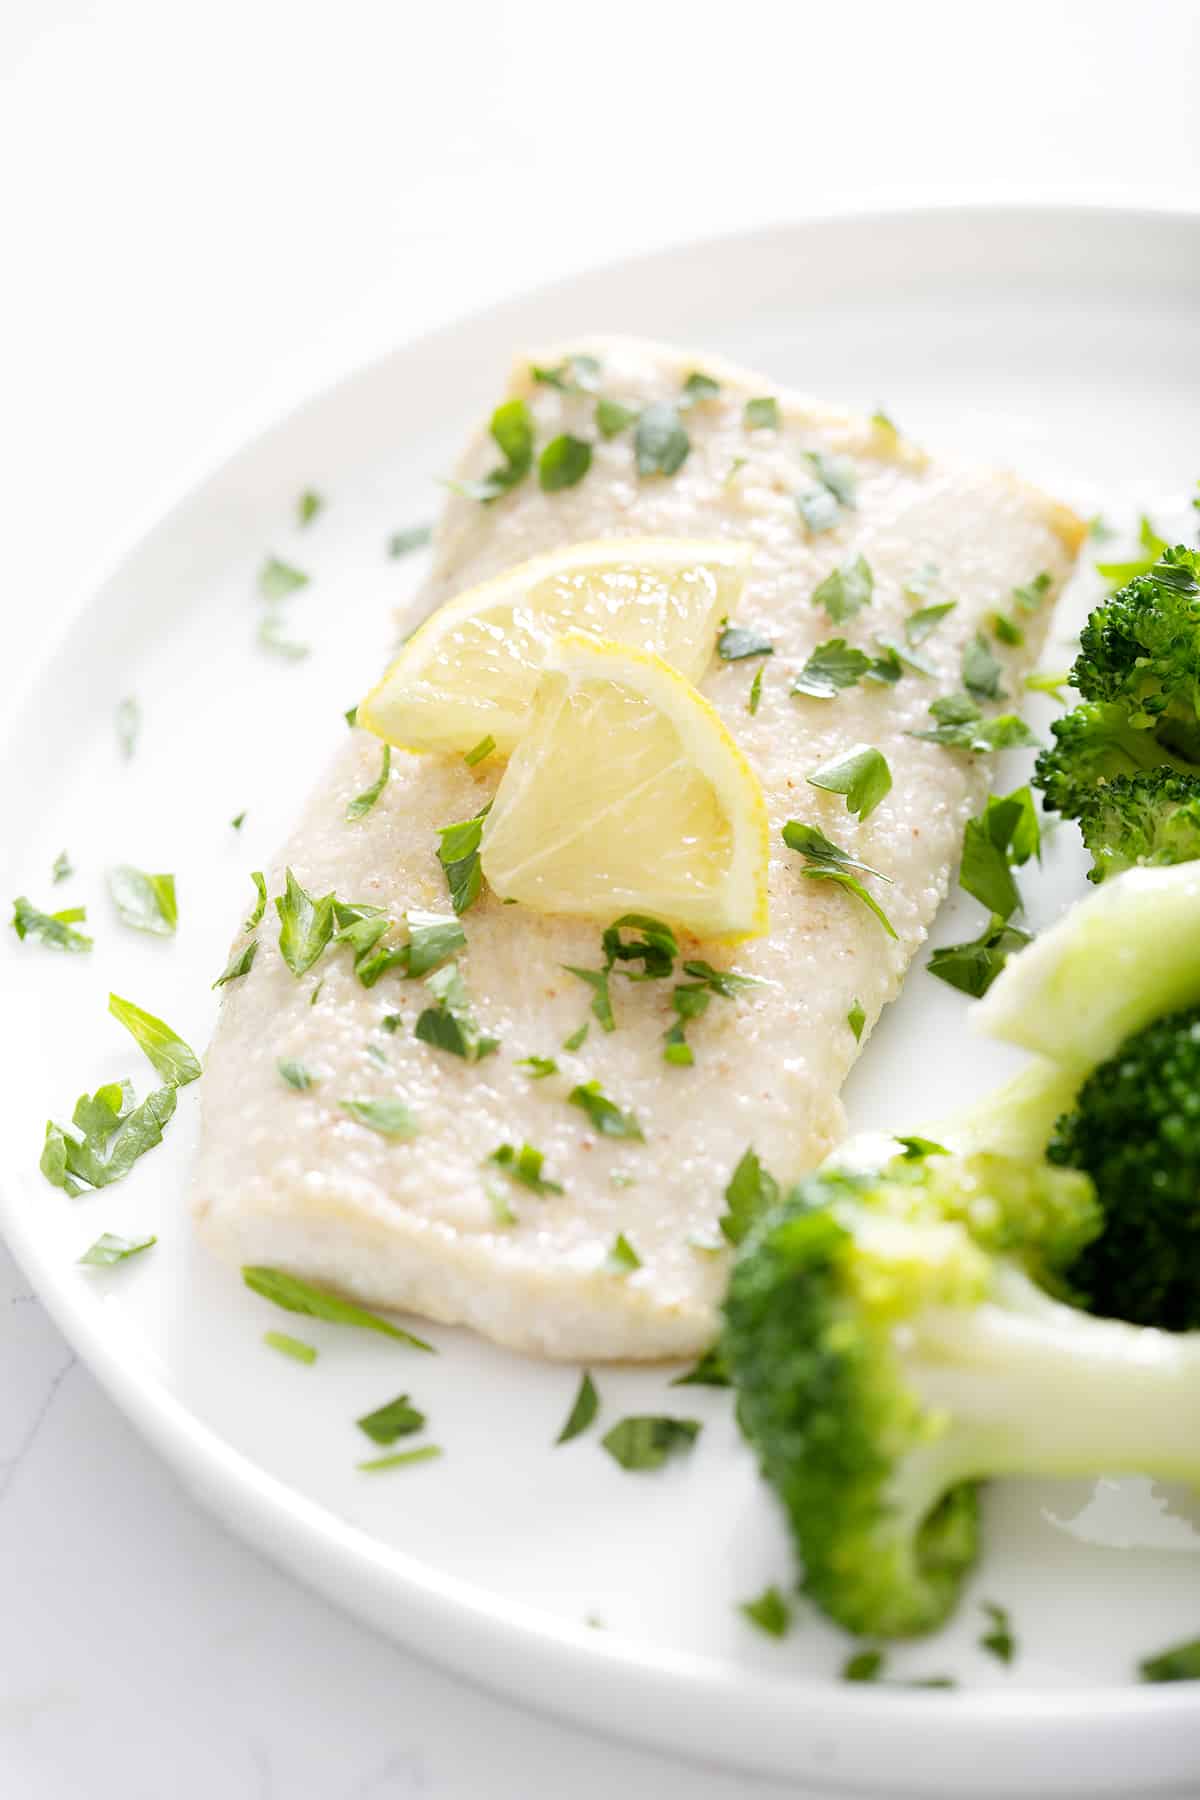 halibut fillet with parsley and lemon slices on white plate with broccoli